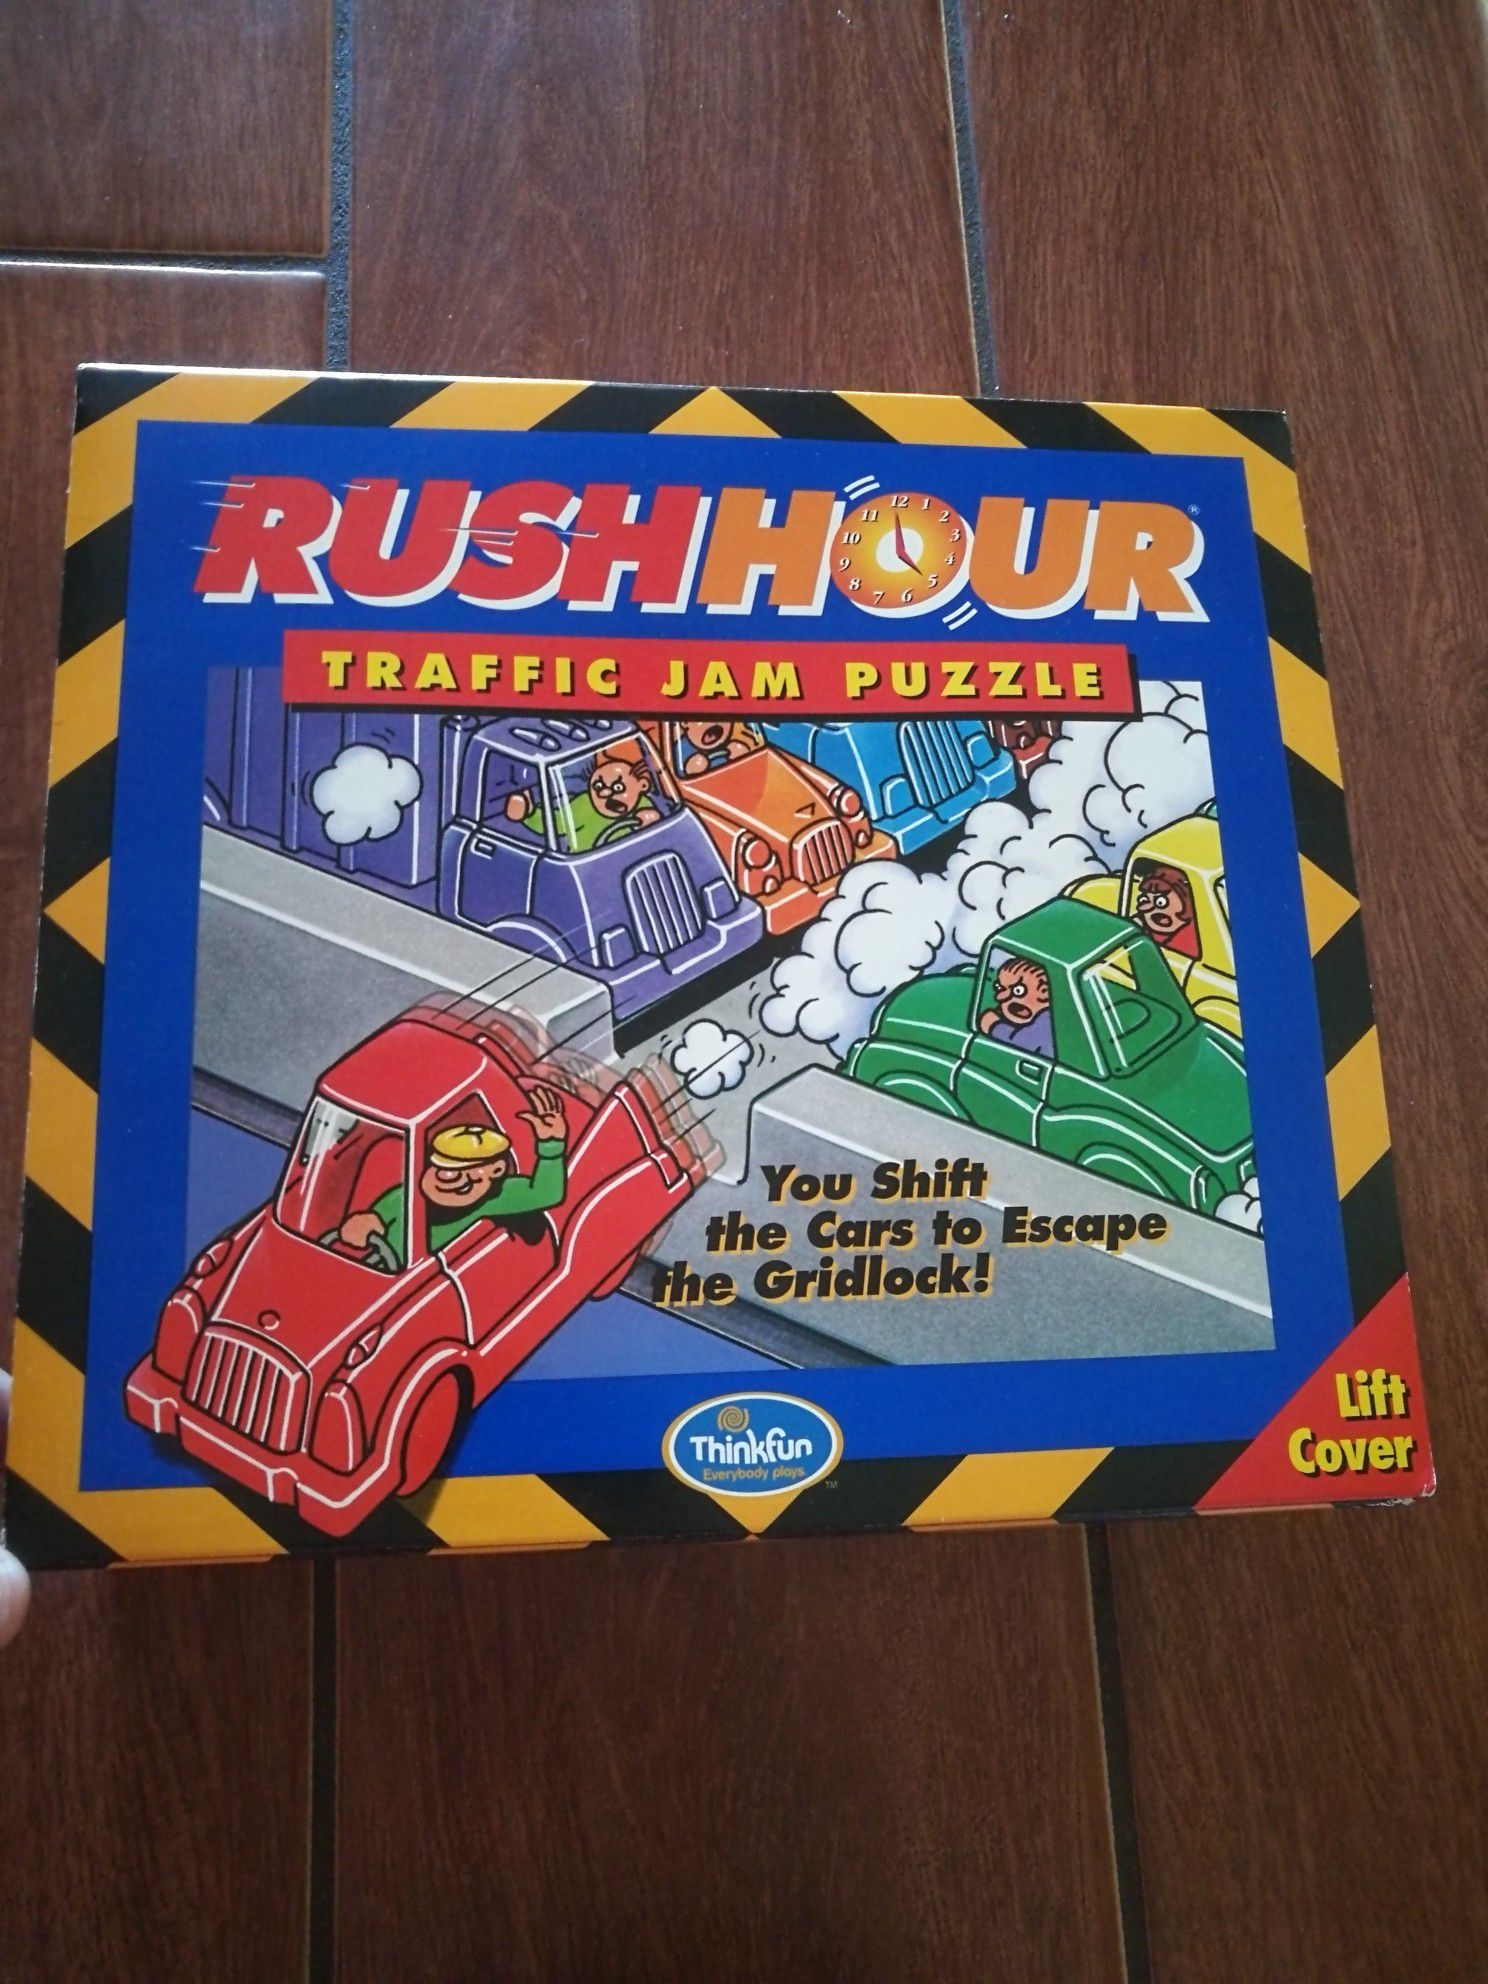 Rush hour traffic jam puzzle learning game